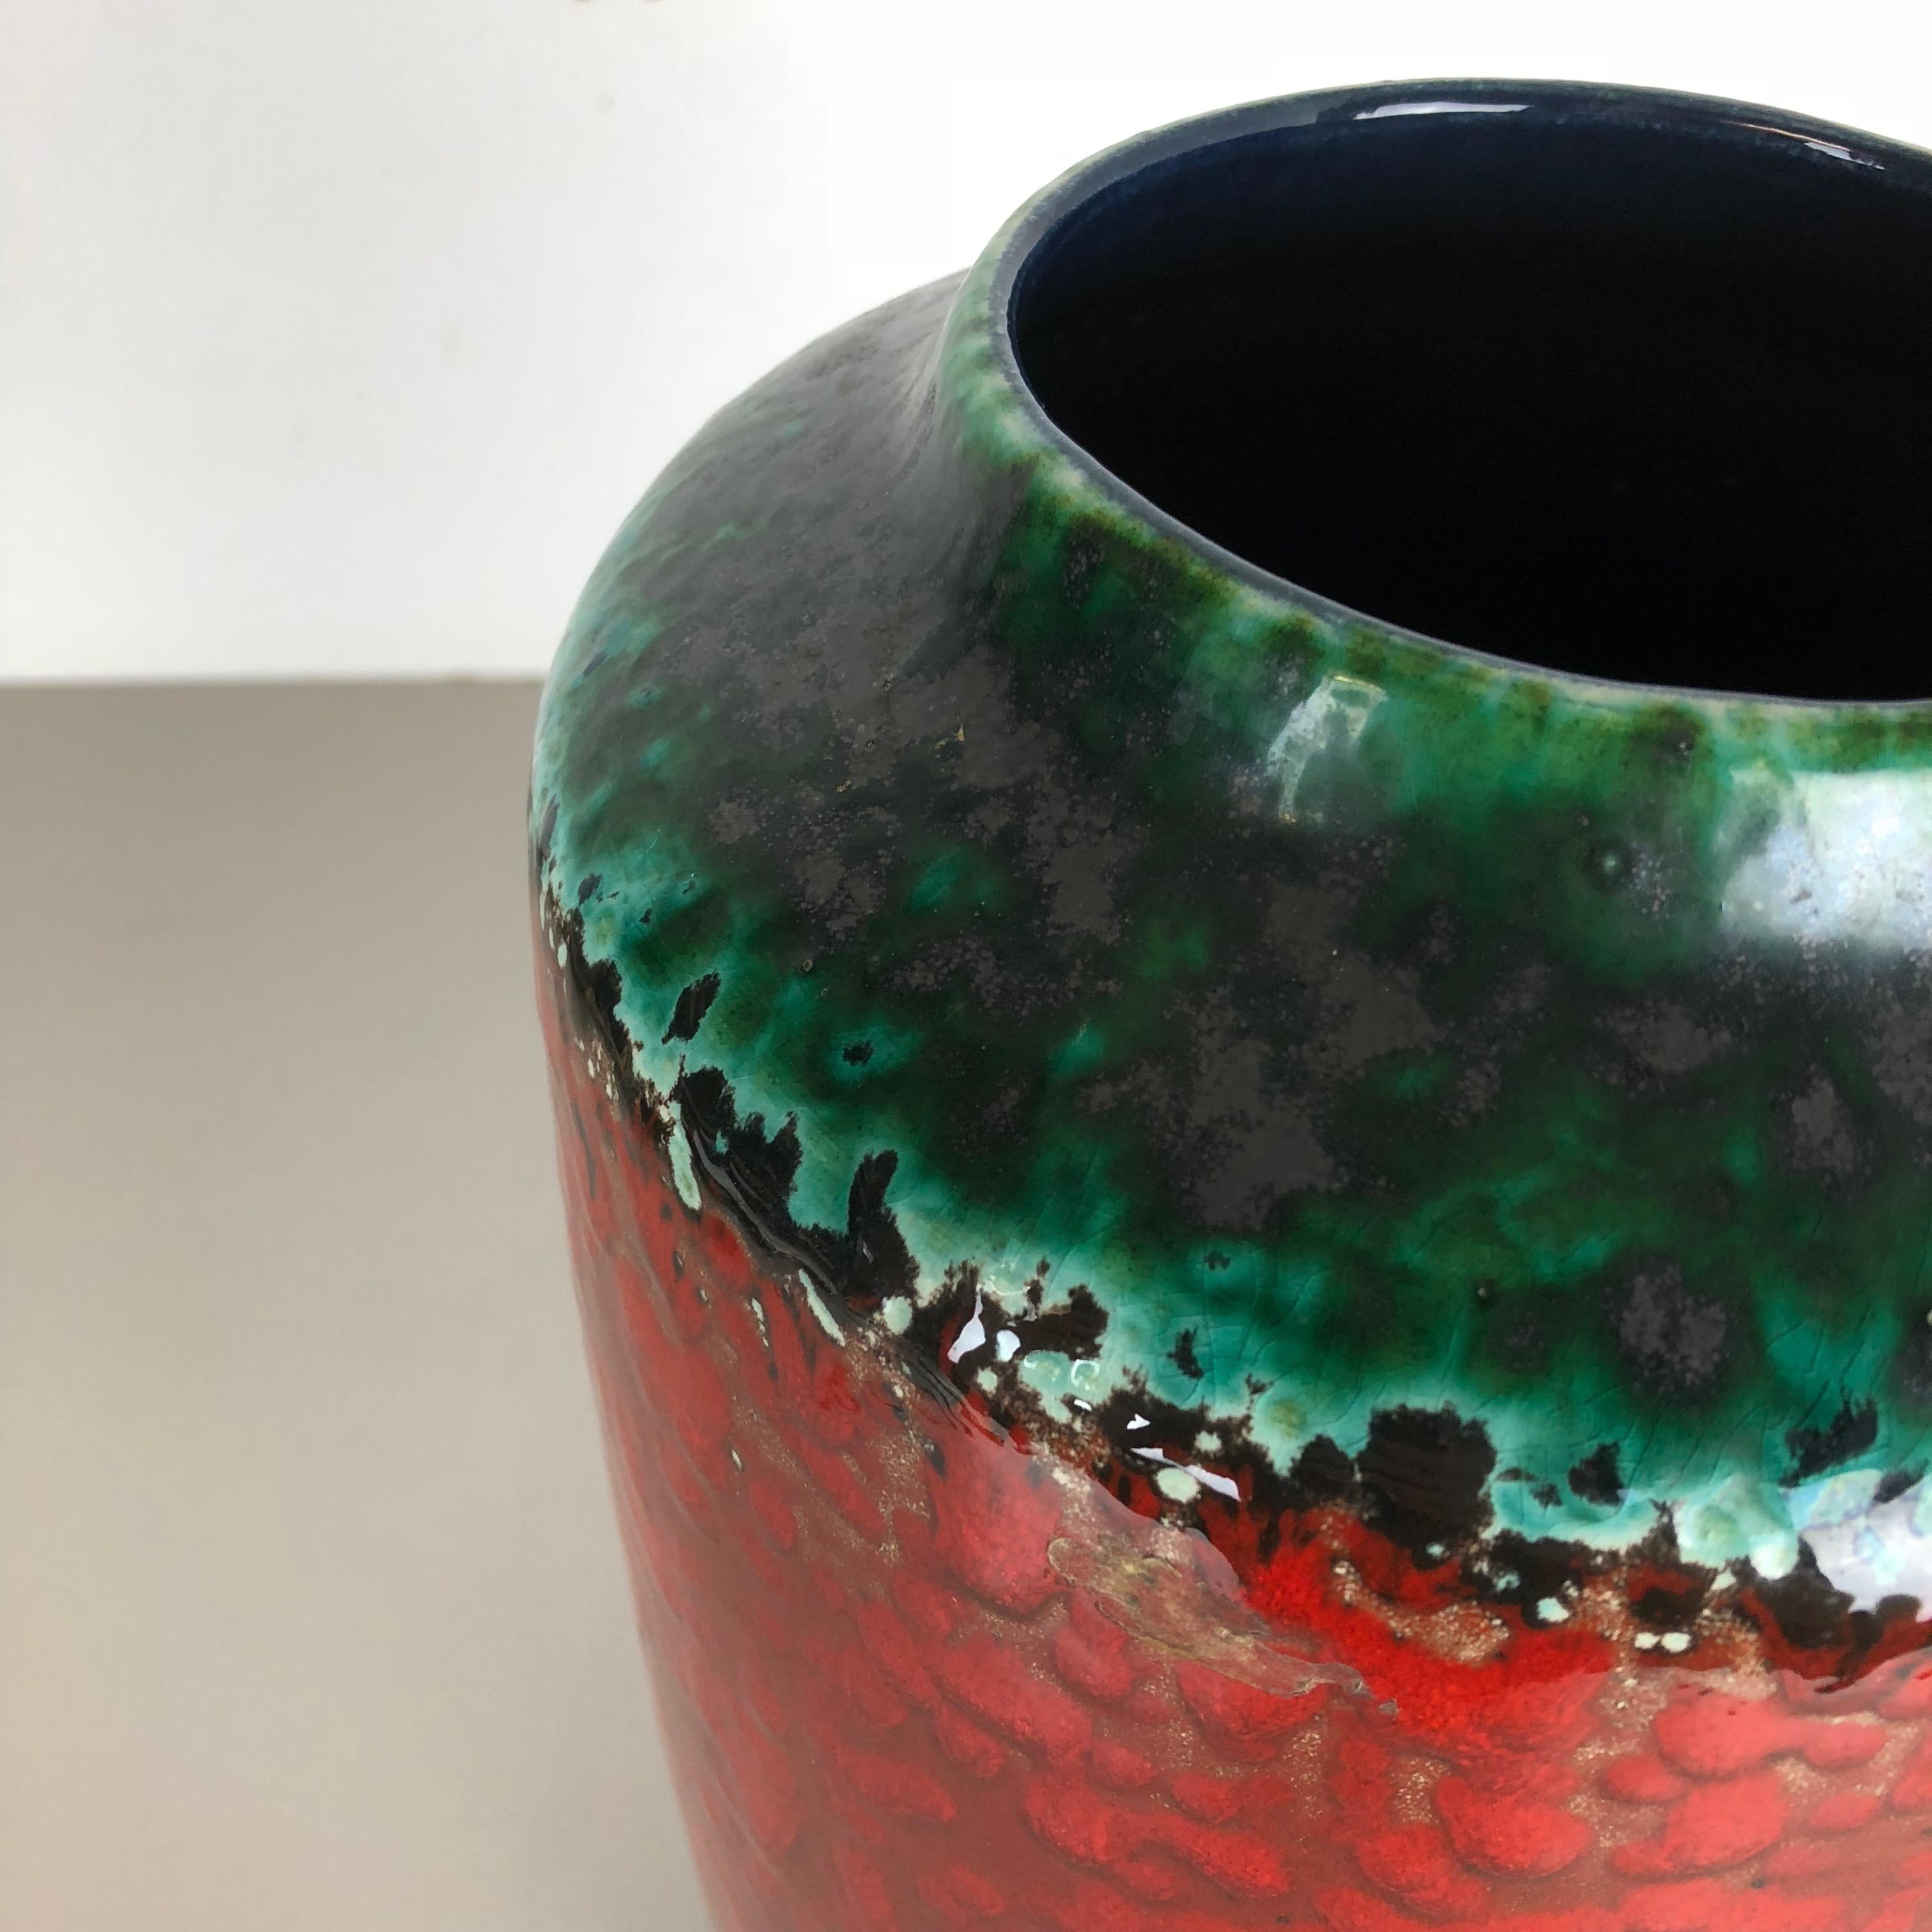 20th Century Large Pottery Fat Lava Multi-Color 517-45 Floor Vase Made by Scheurich, 1970s For Sale